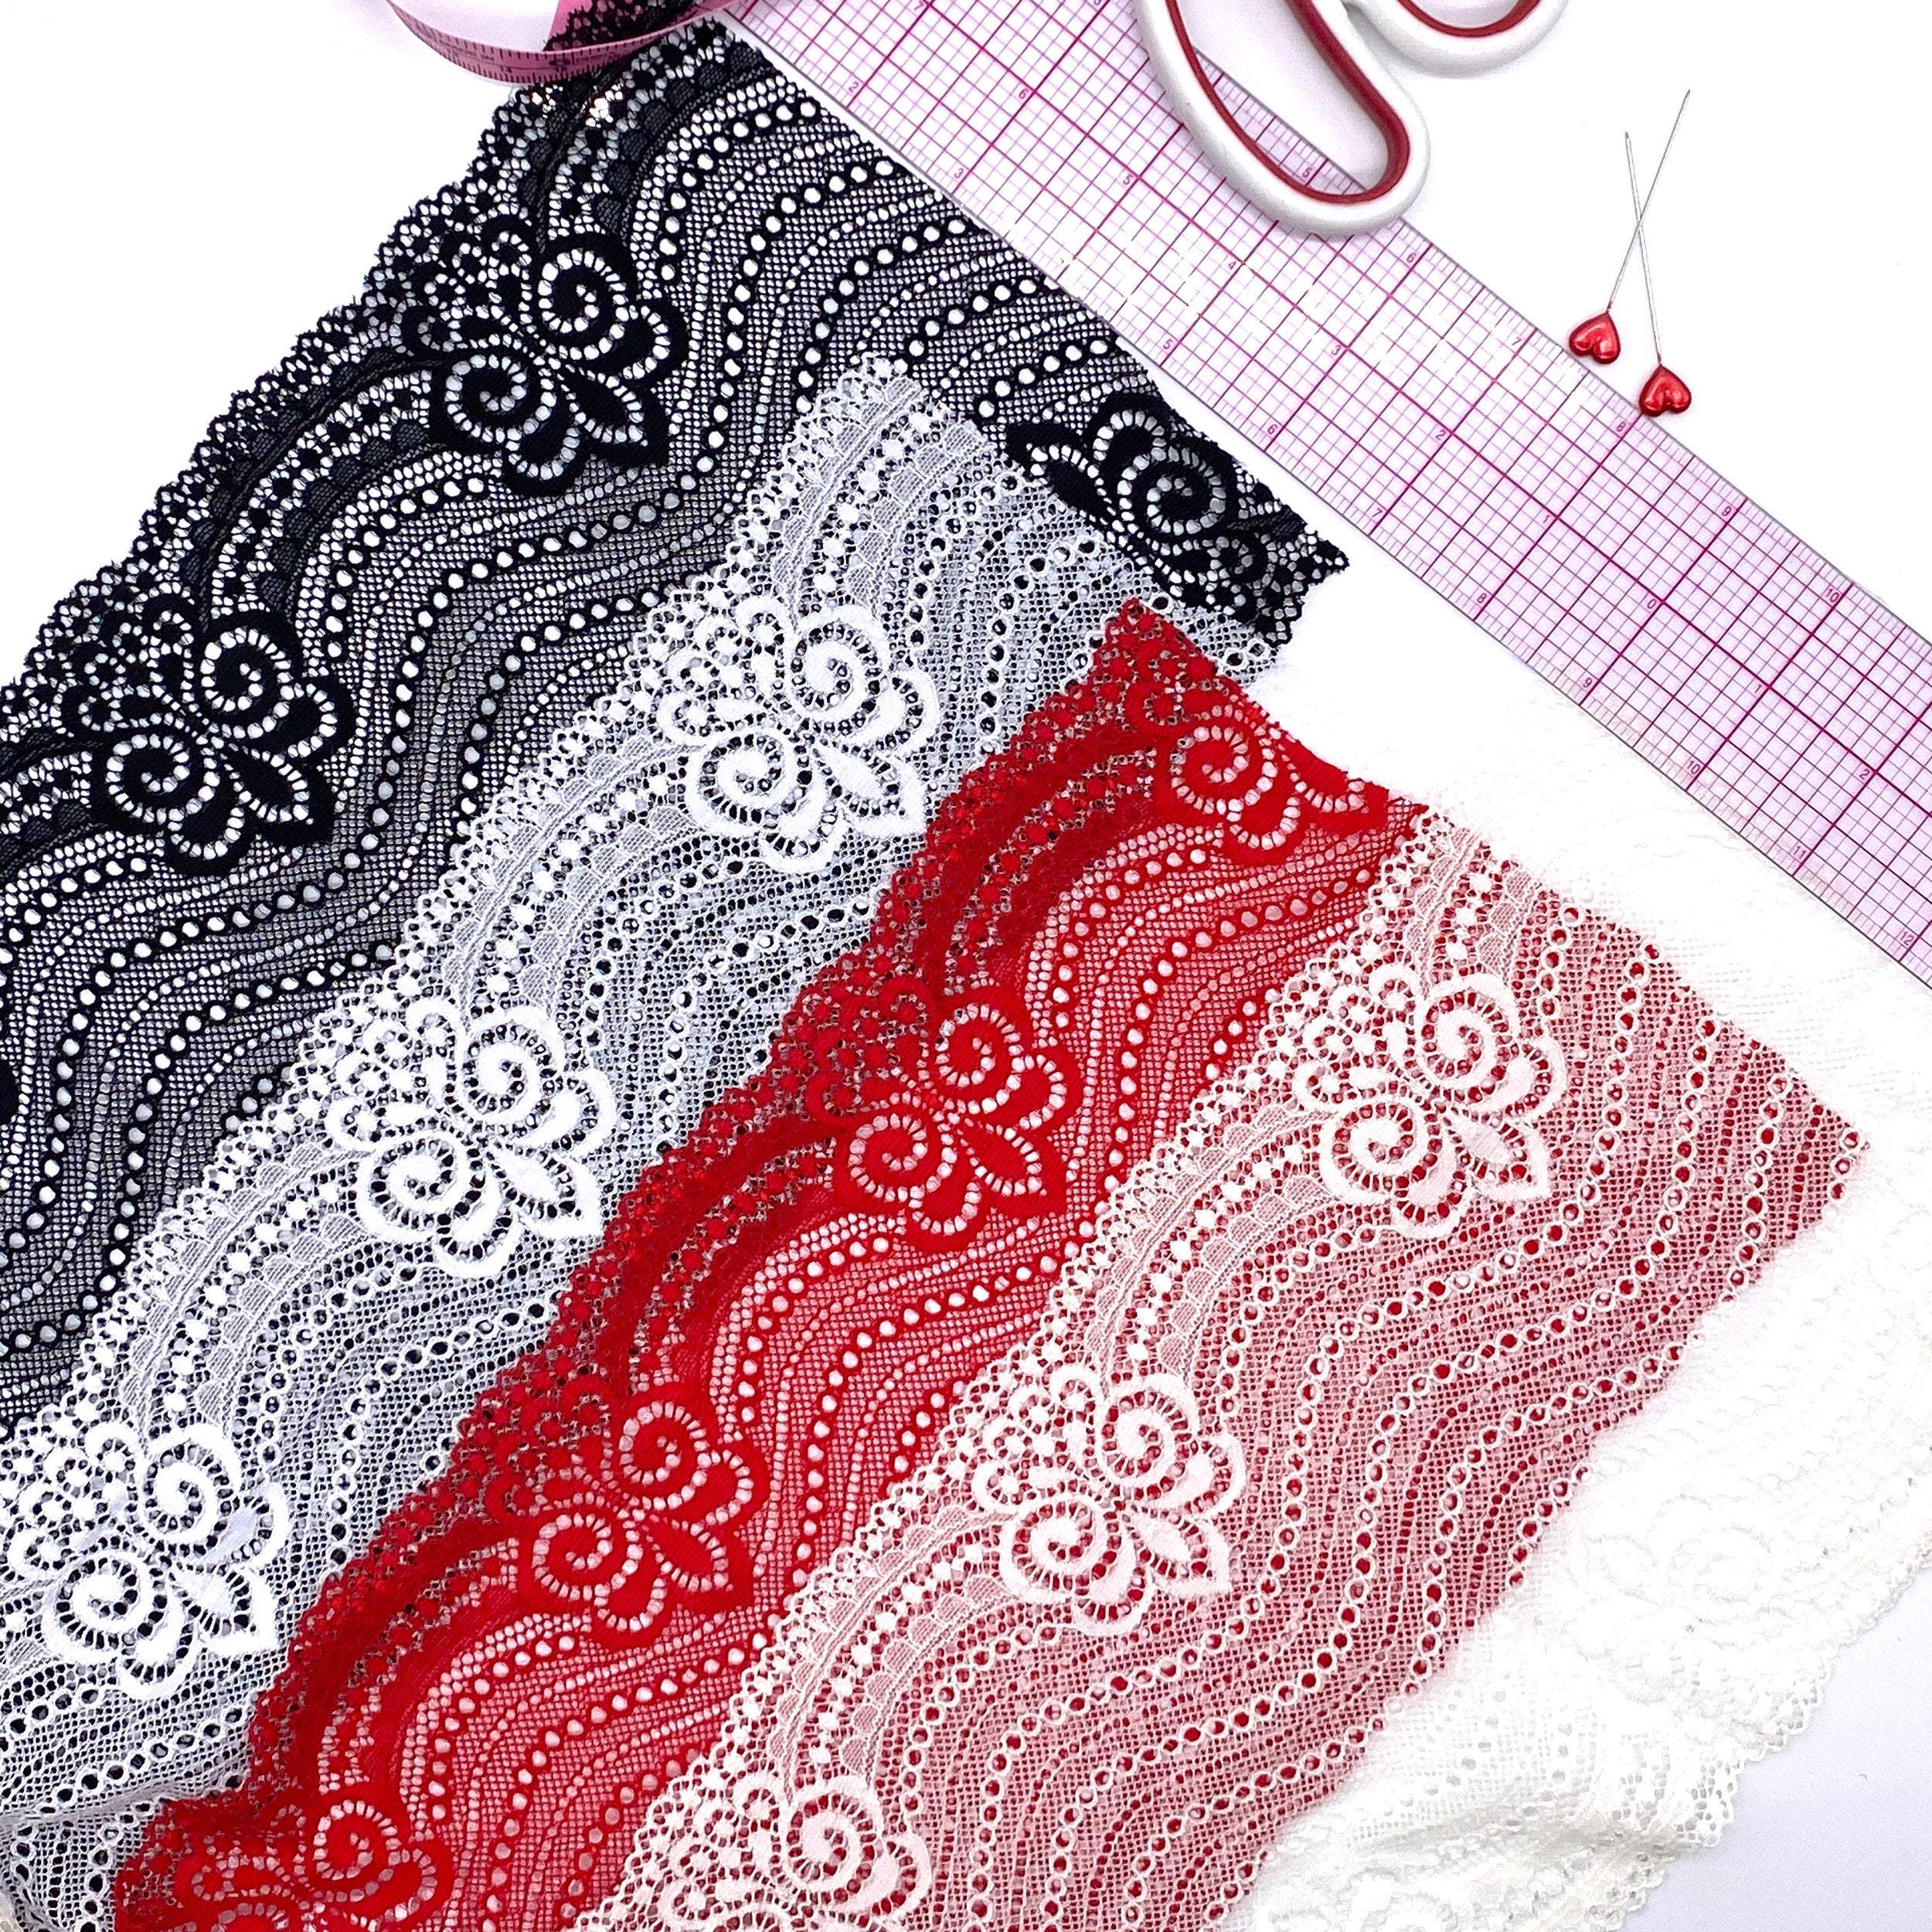 6 1/4" (16cm) Stretch Lace, Soft, High-Quality in White, Black, Ivory or Red- by the 1 yard - Stitch Love Studio